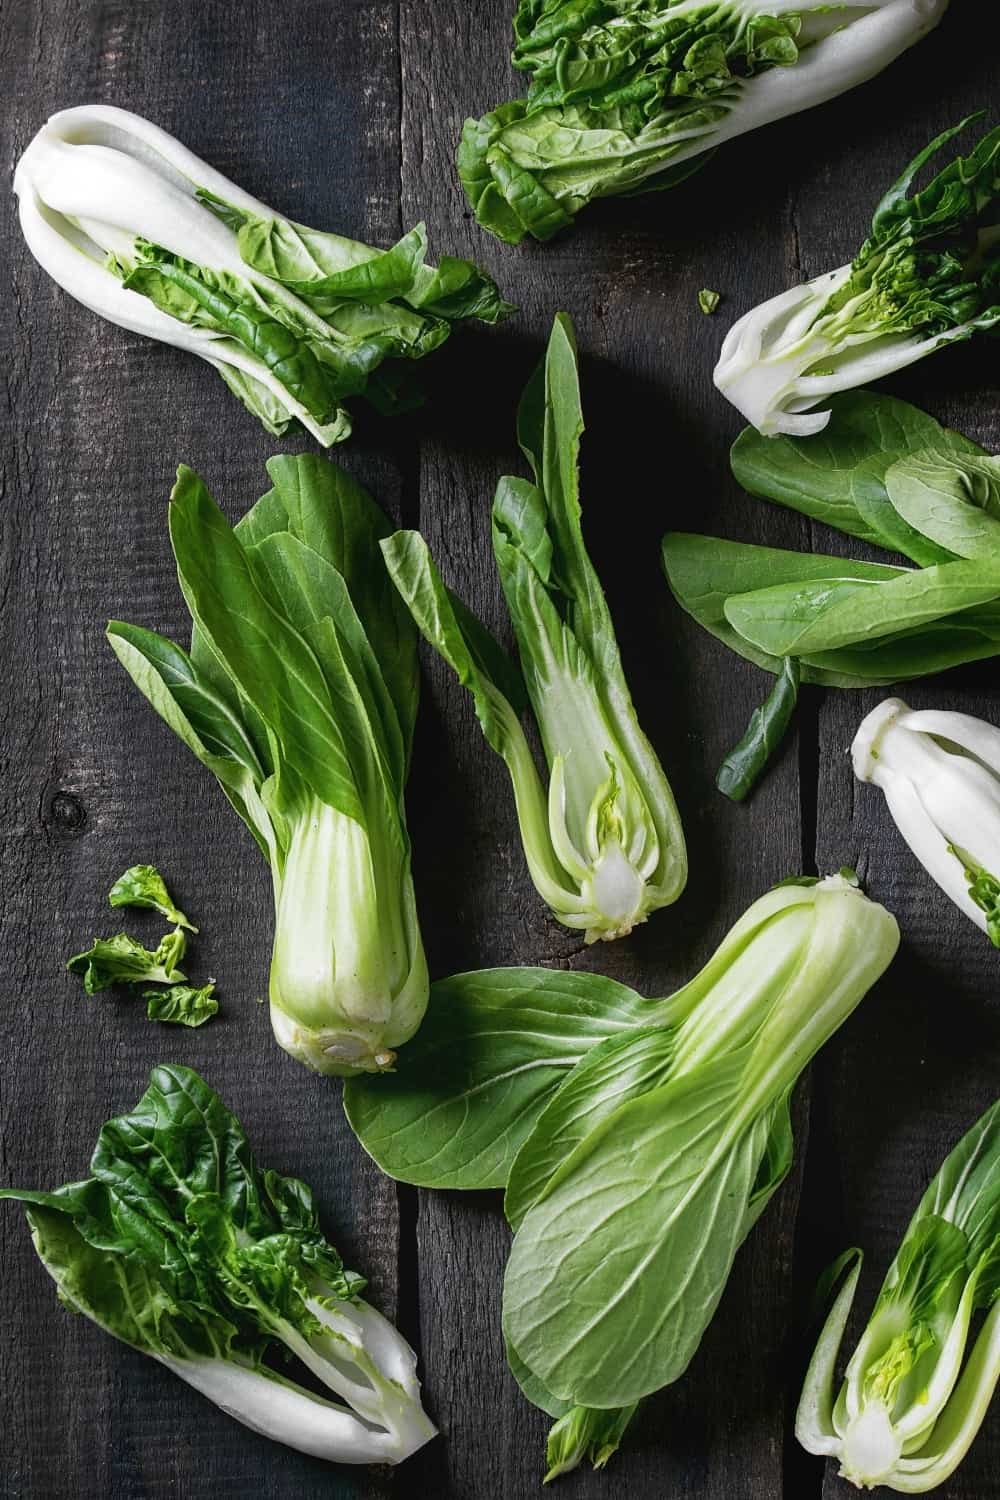 Assortment of whole and sliced raw baby bok choy (Chinese cabbage) over old wooden background.